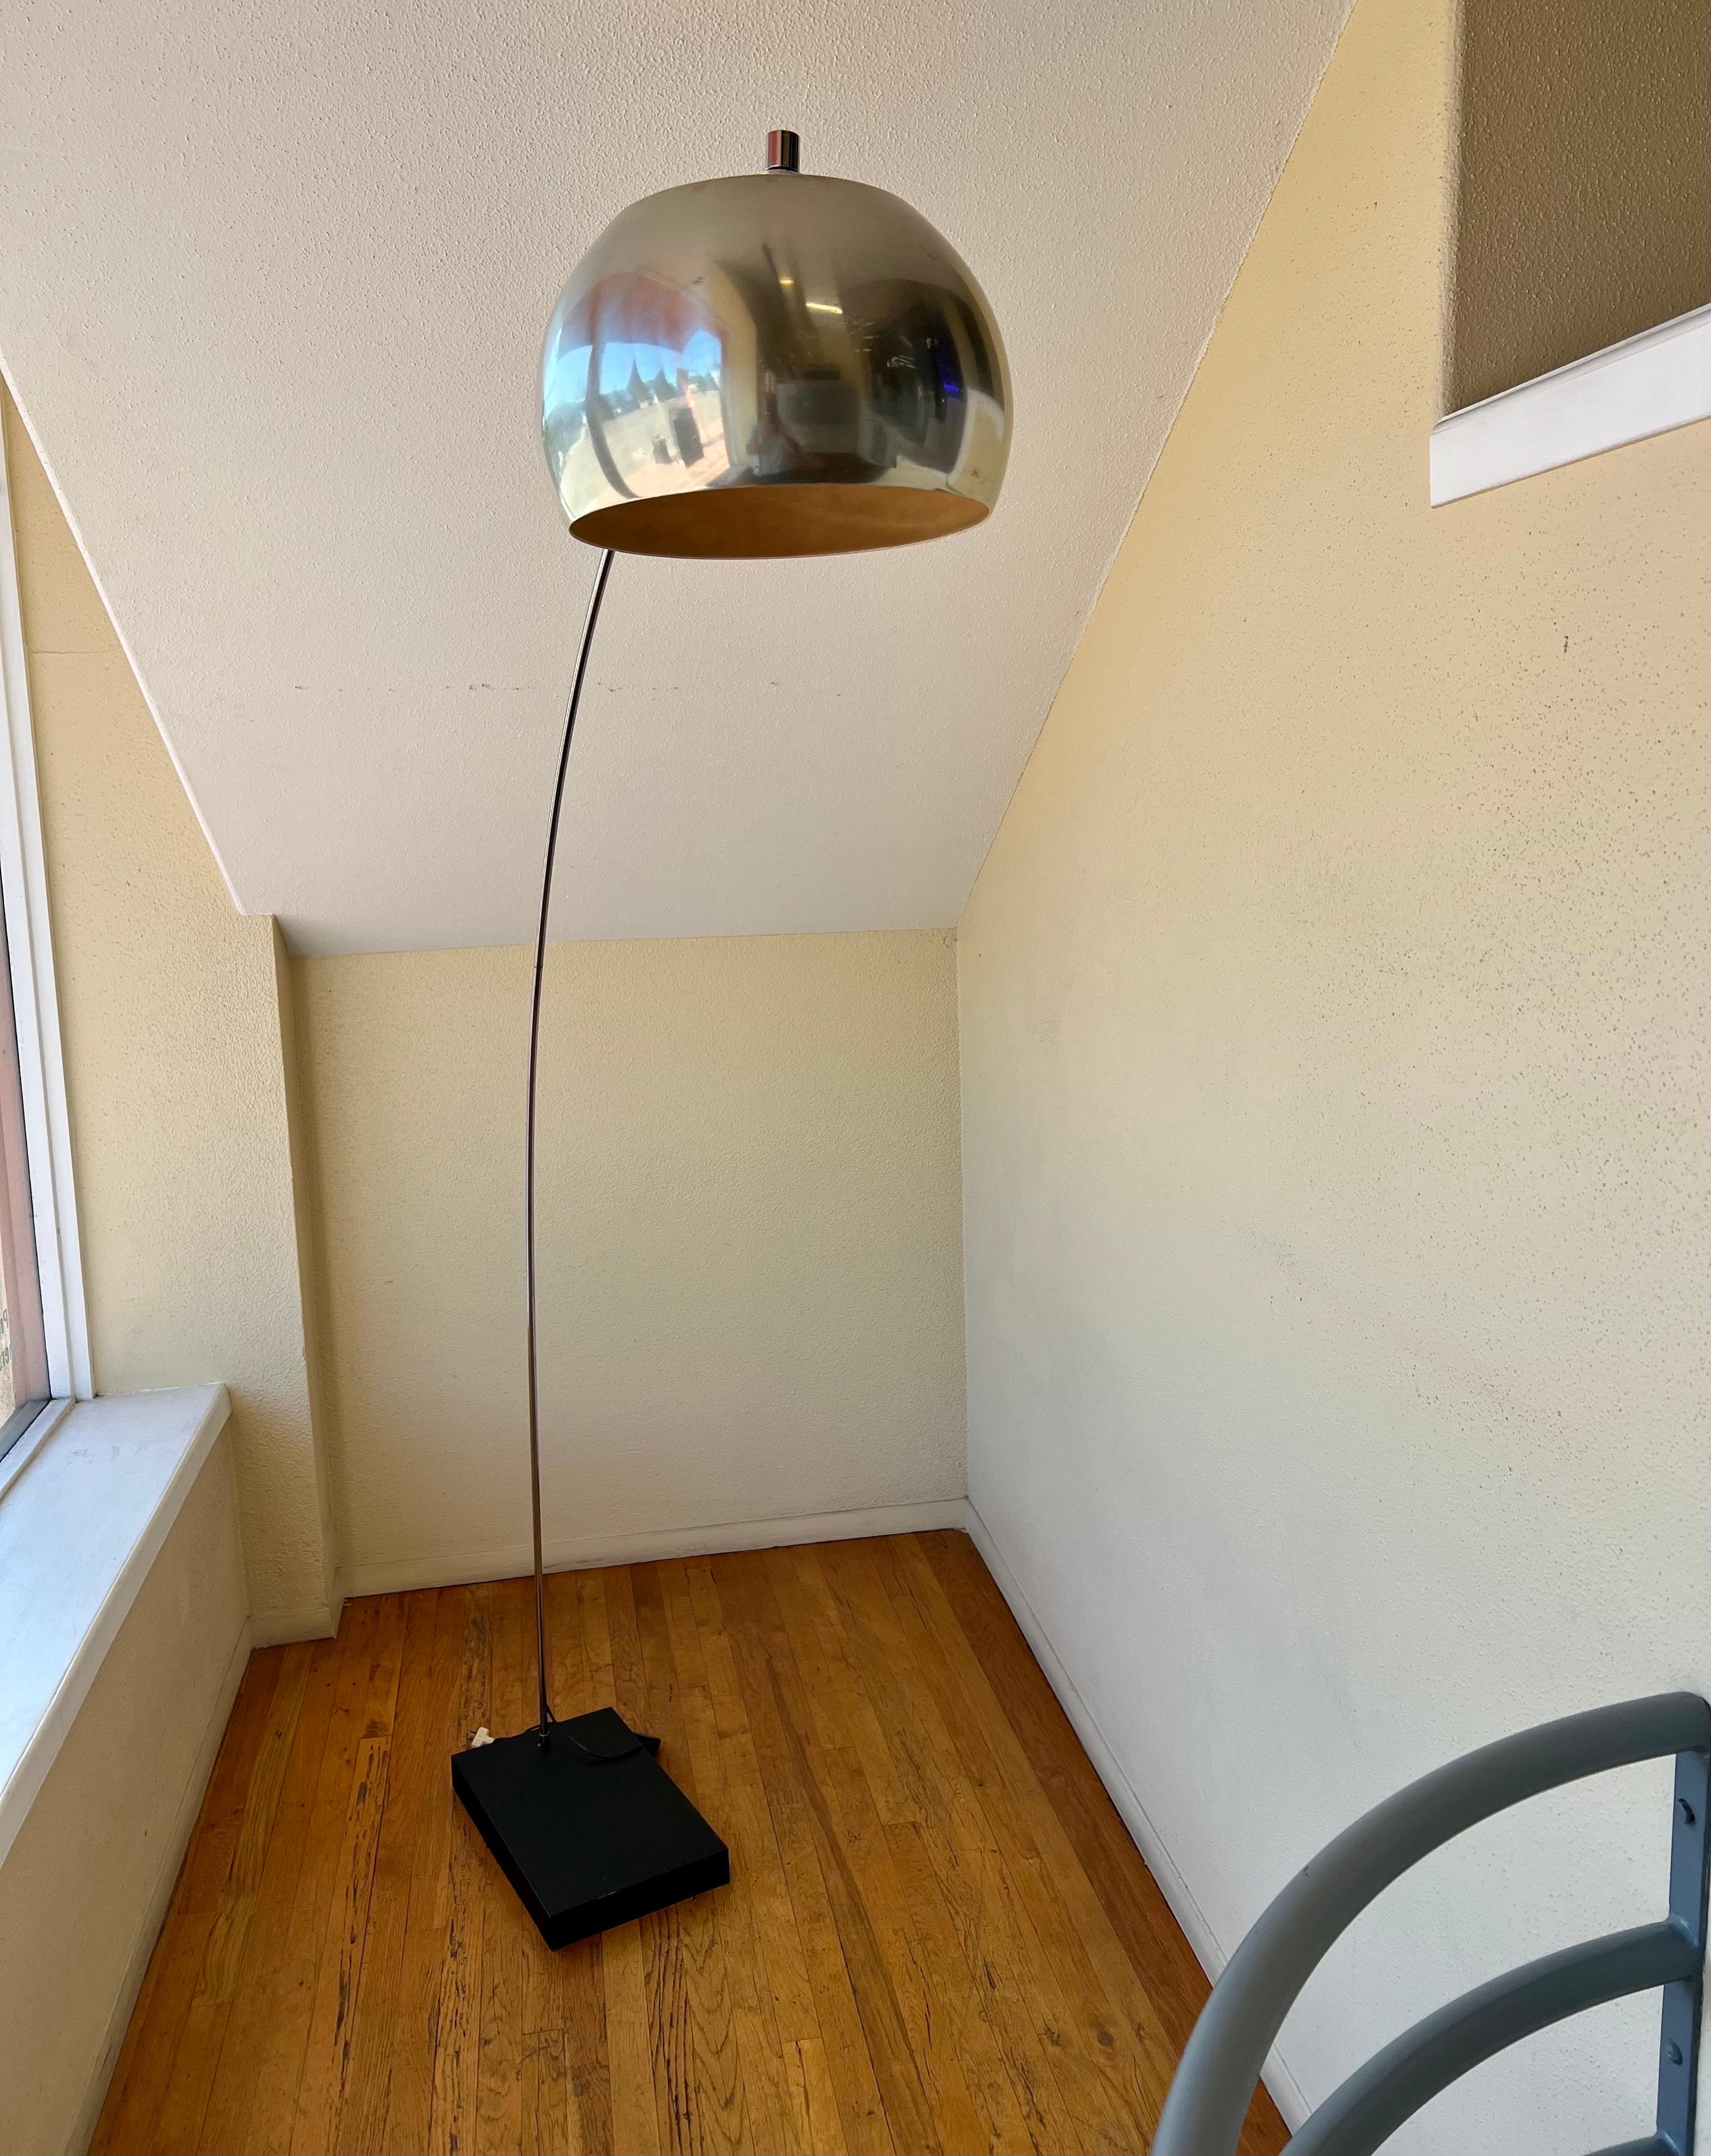 Fantasic Large space age floor lamp. circa 1970 chrome polished pipping with aluminium shade, and push-off switch all original condition comes apart for easy shipping the base comes off the shade, and the pipping splits, the condition its very clean